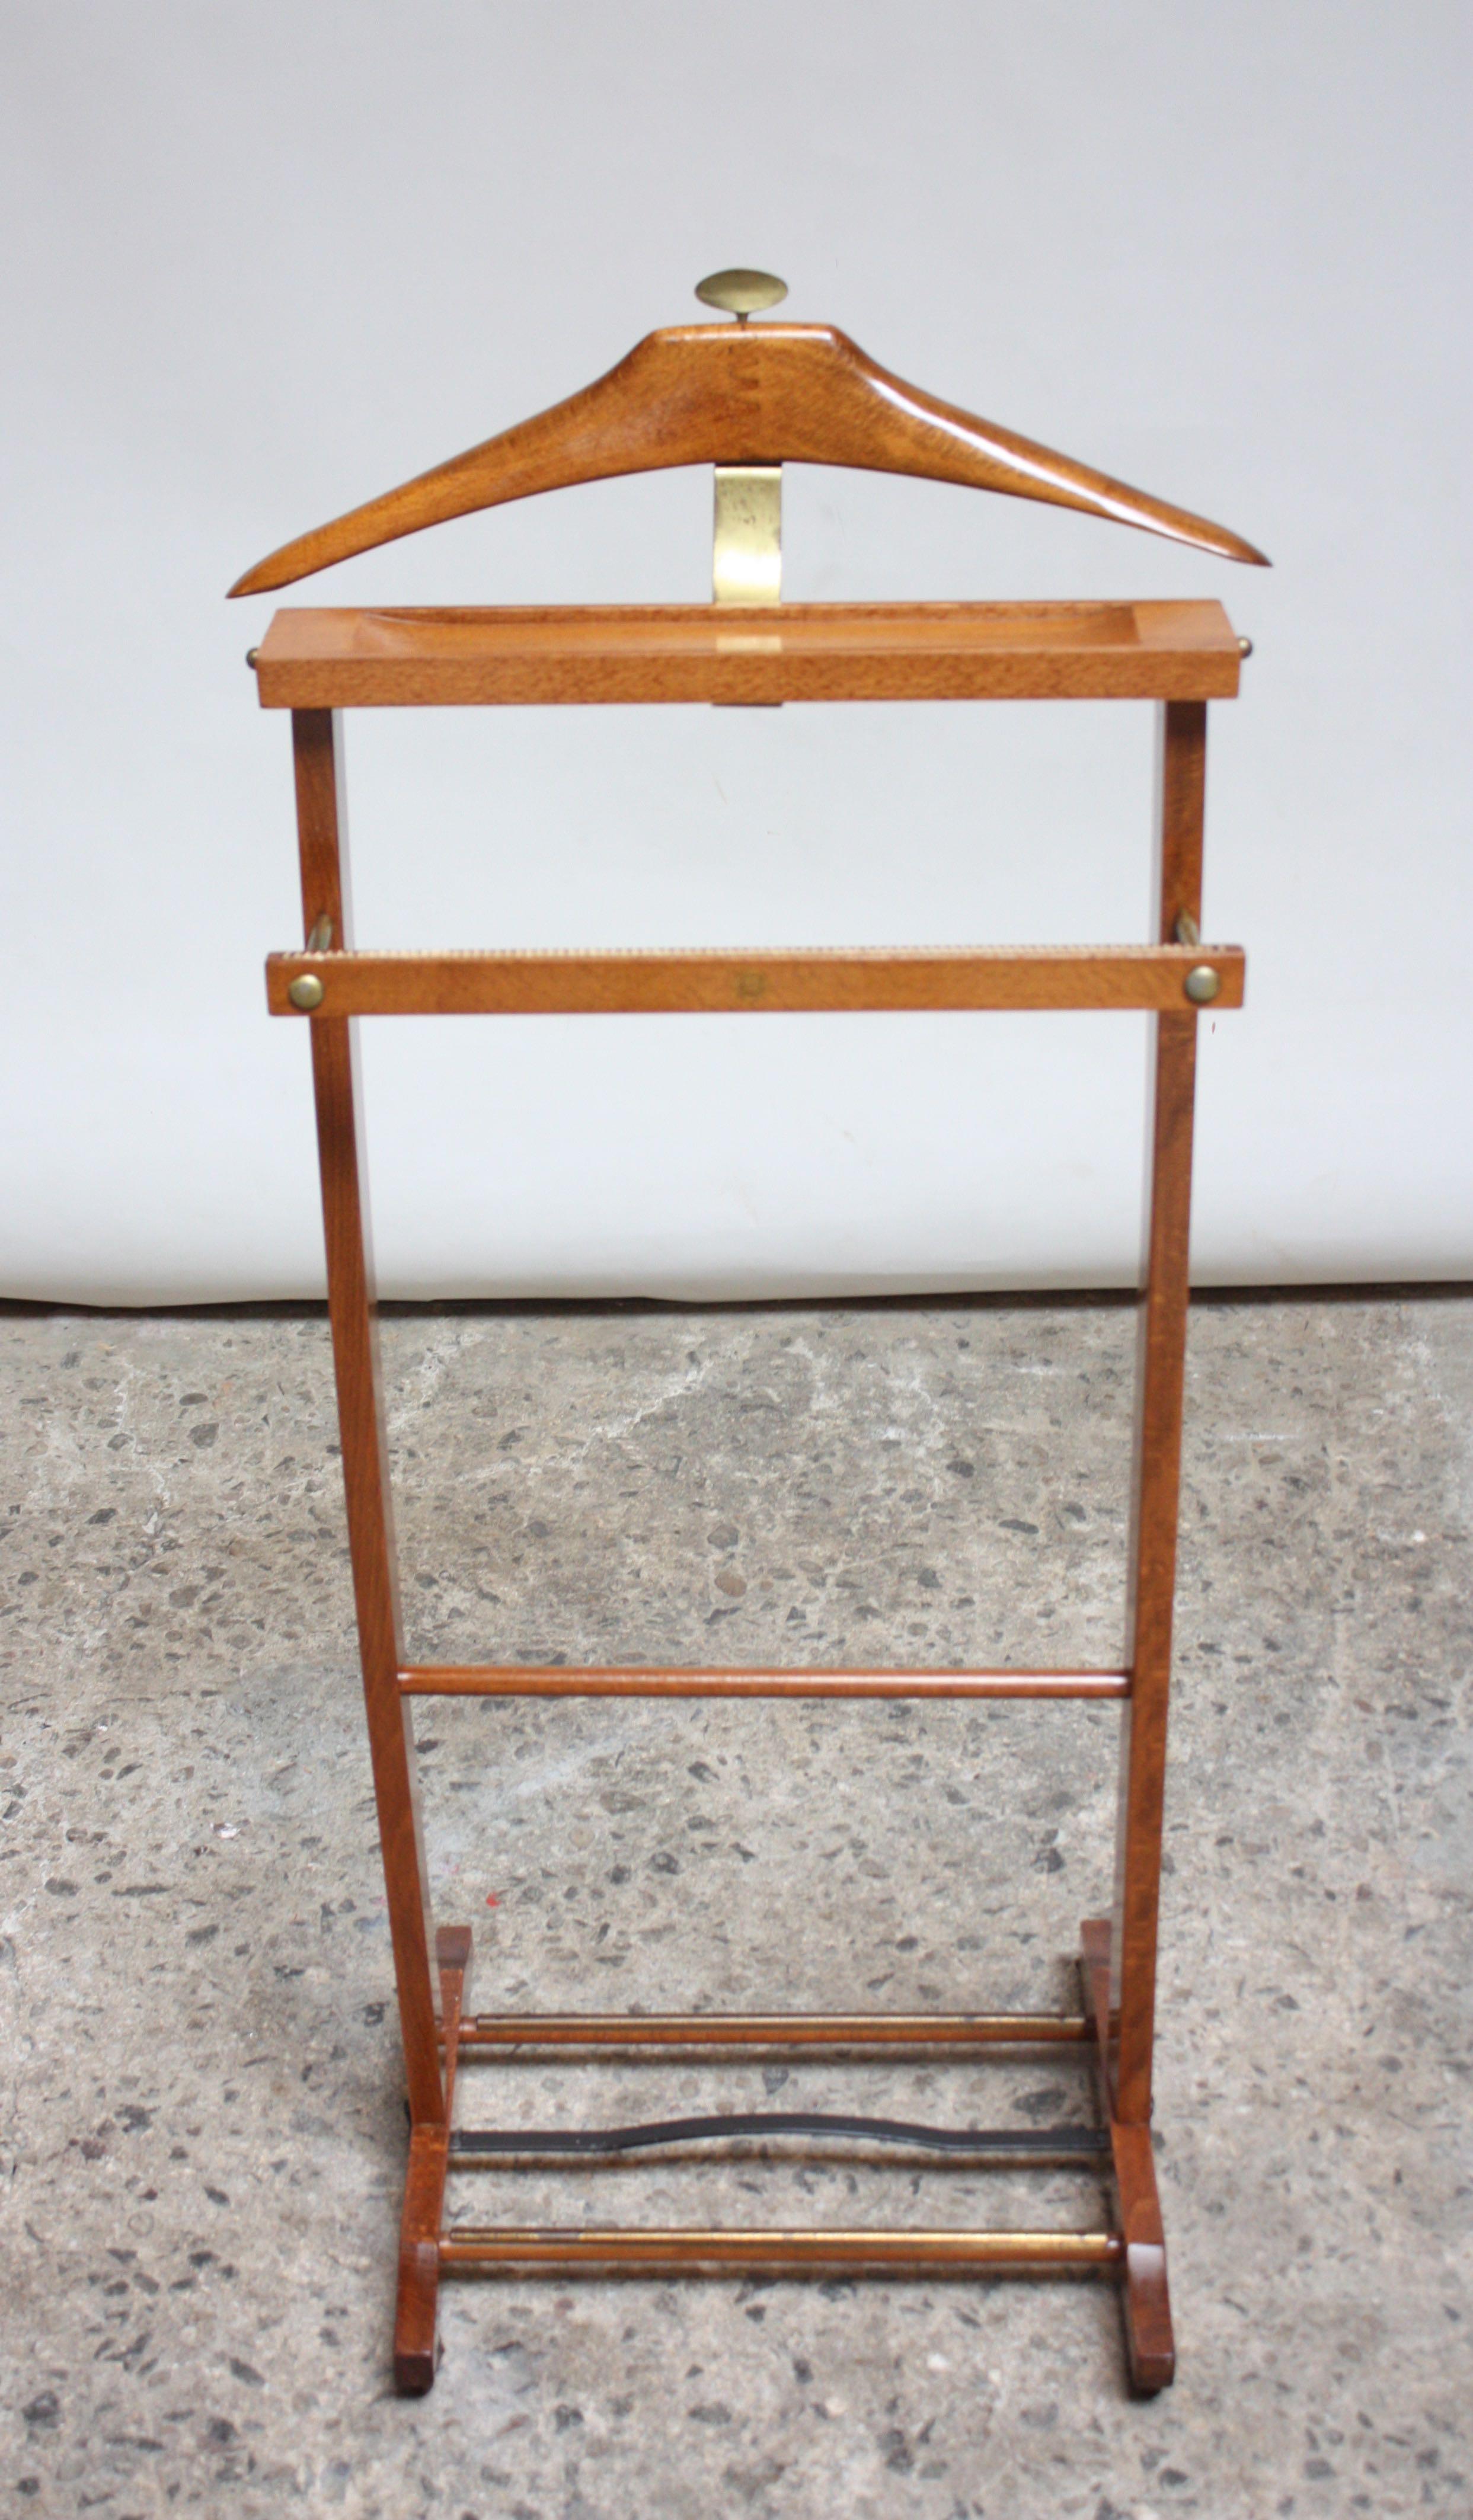 Uncommon Italian valet designed by Ico Parisi for Fratelli Reguitti in the 1950s. Composed of a hanger with brass accents and change or cufflink holder with a double rack on the bottom for shoes, lower bar (presumably for socks) and four caster